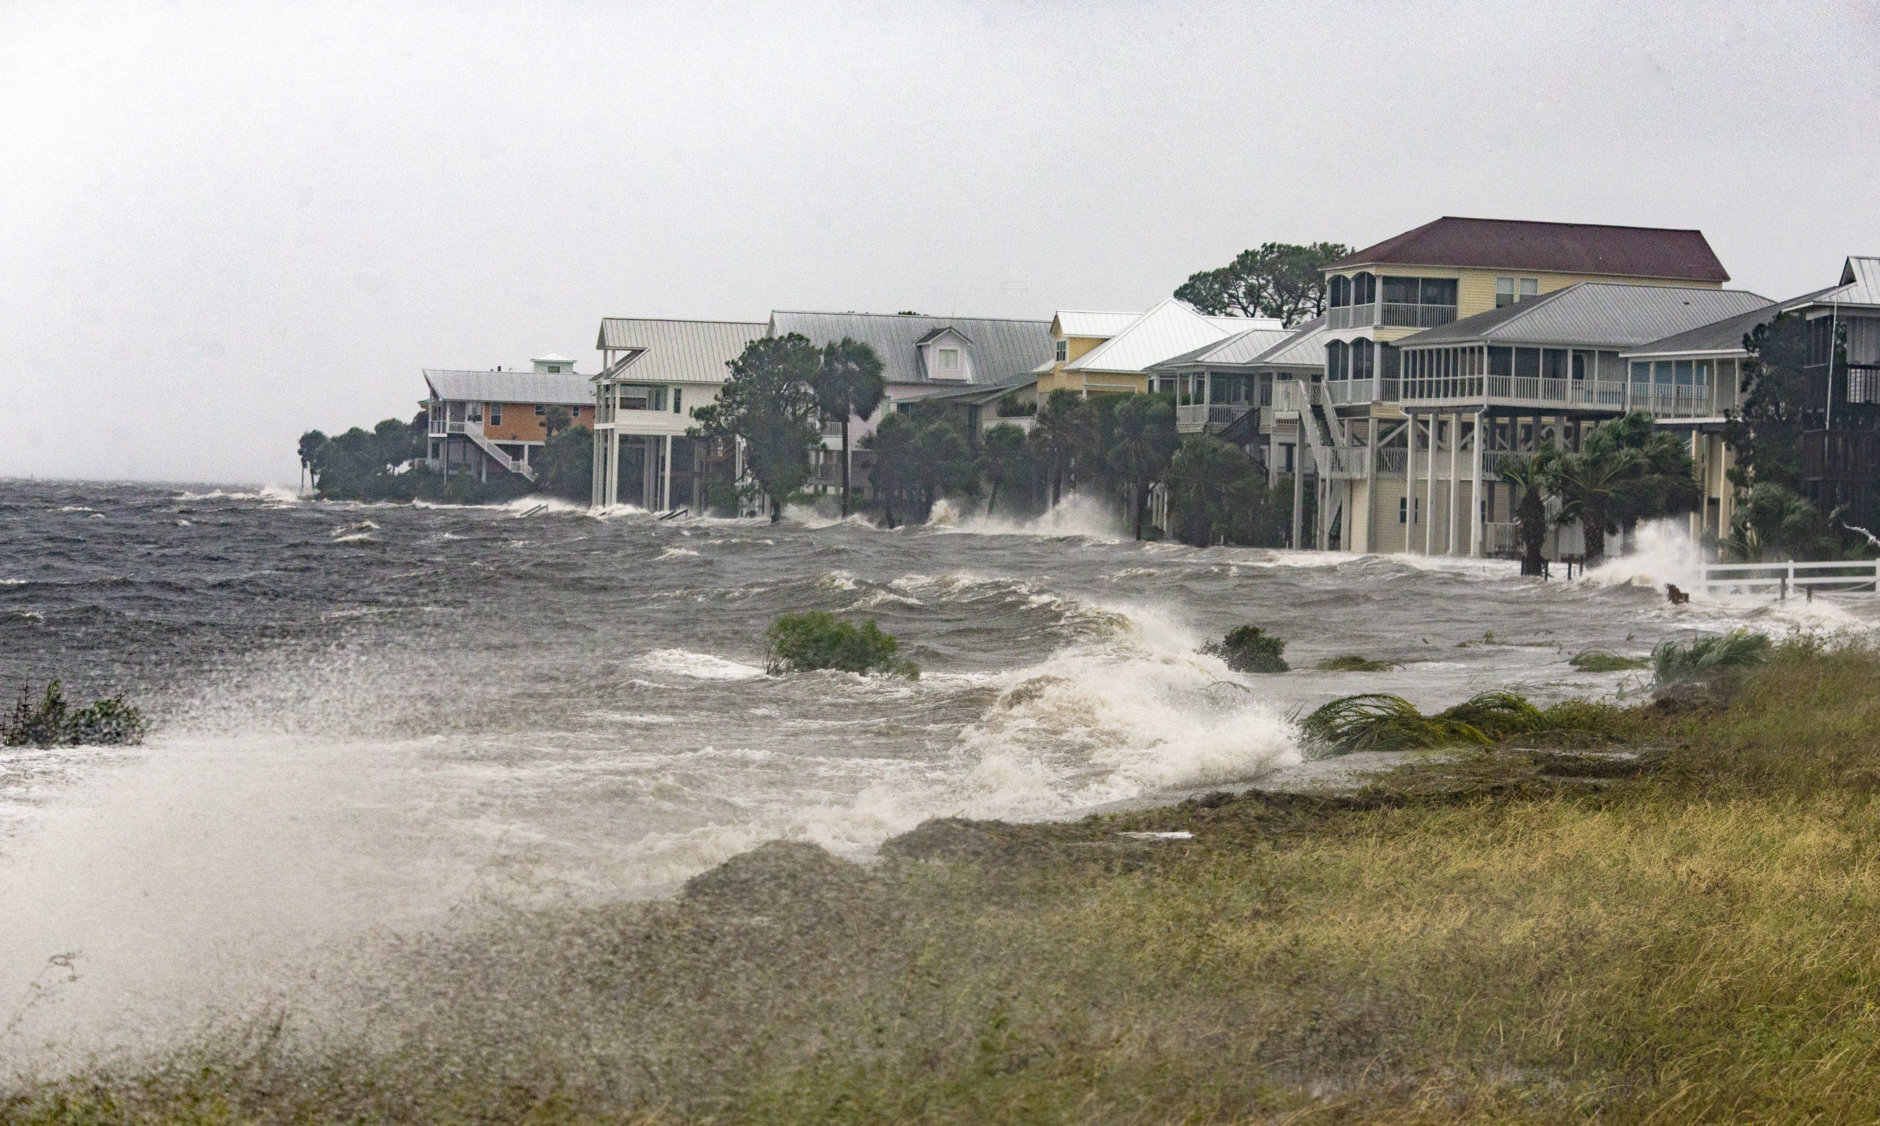 SHELL POINT BEACH, FL - OCTOBER 10: The storm surge and waves from Hurricane Michael batter the beachfront homes on October 10, 2018 in the Florida Panhandle community of Shell Point Beach, Florida. The hurricane is forecast to hit the Florida Panhandle at a possible category 4 storm.  (Photo by Mark Wallheiser/Getty Images)